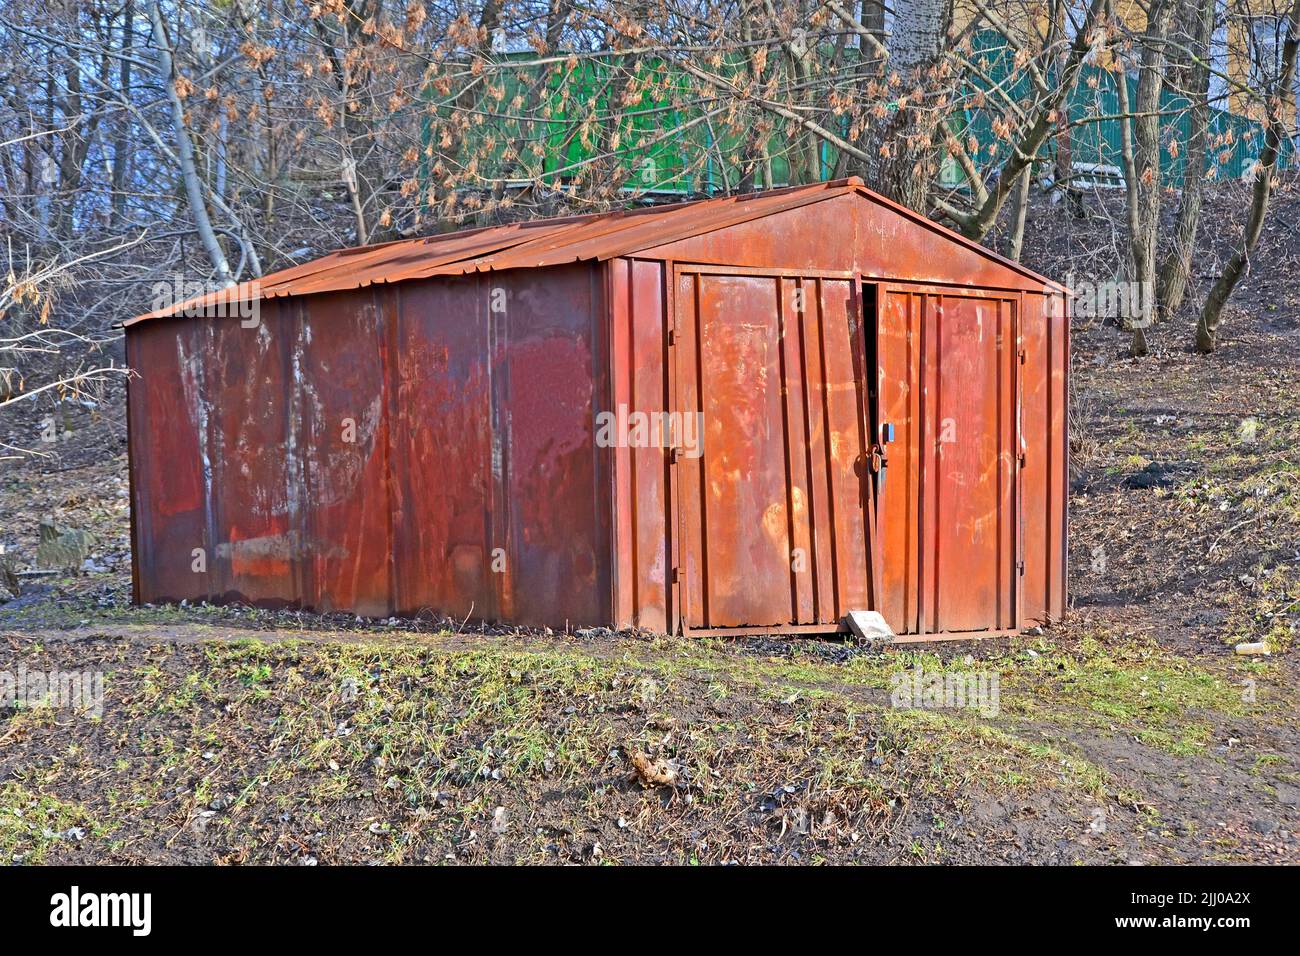 abandoned vintage rysty garage aka shed, closed metal box, old container diversity Stock Photo